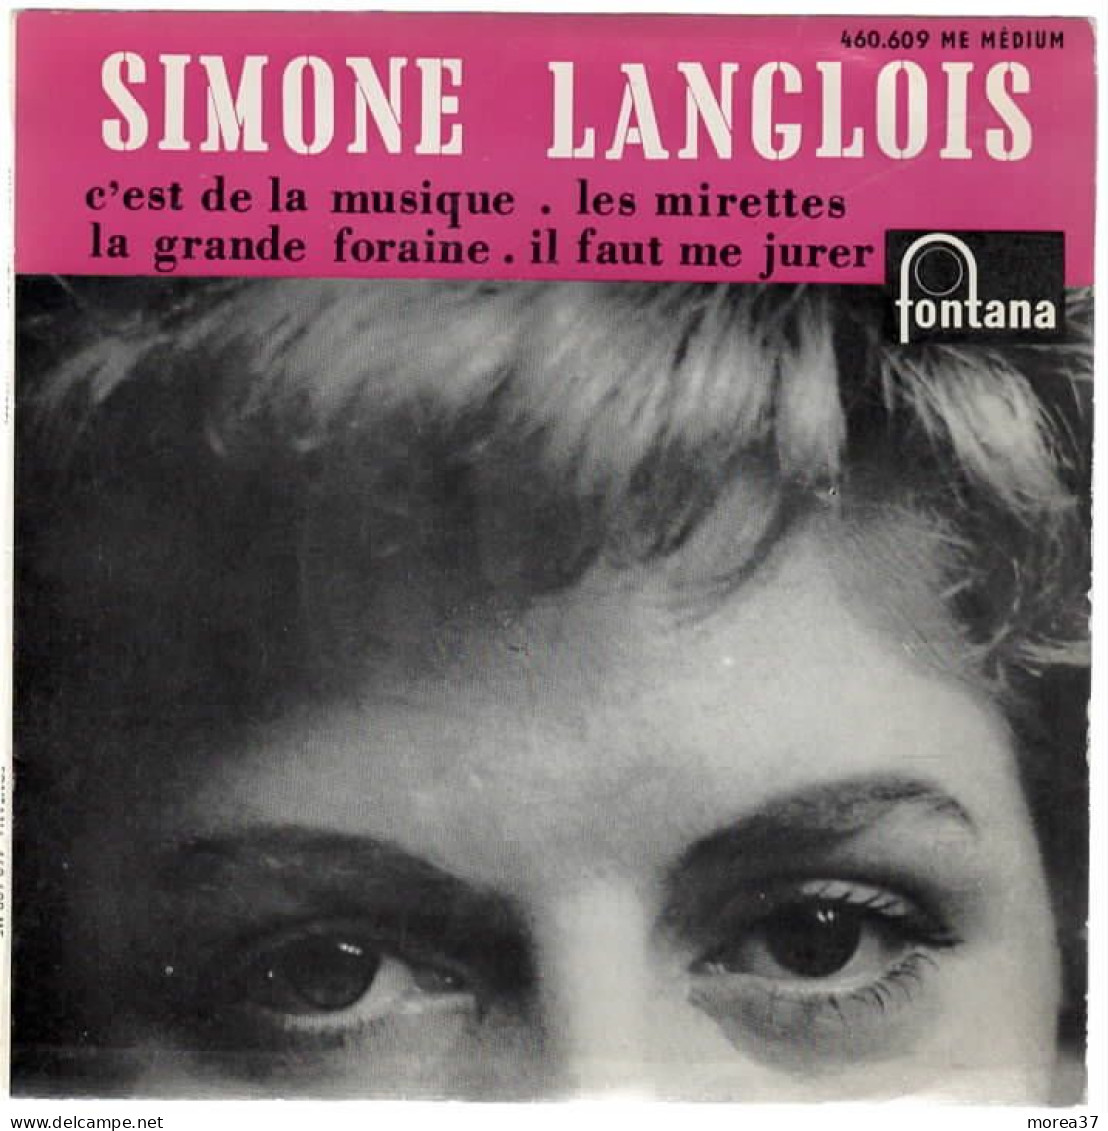 SIMONE LANGLOIS   Les Mirettes    FONTANA  460.609 ME - Other - French Music